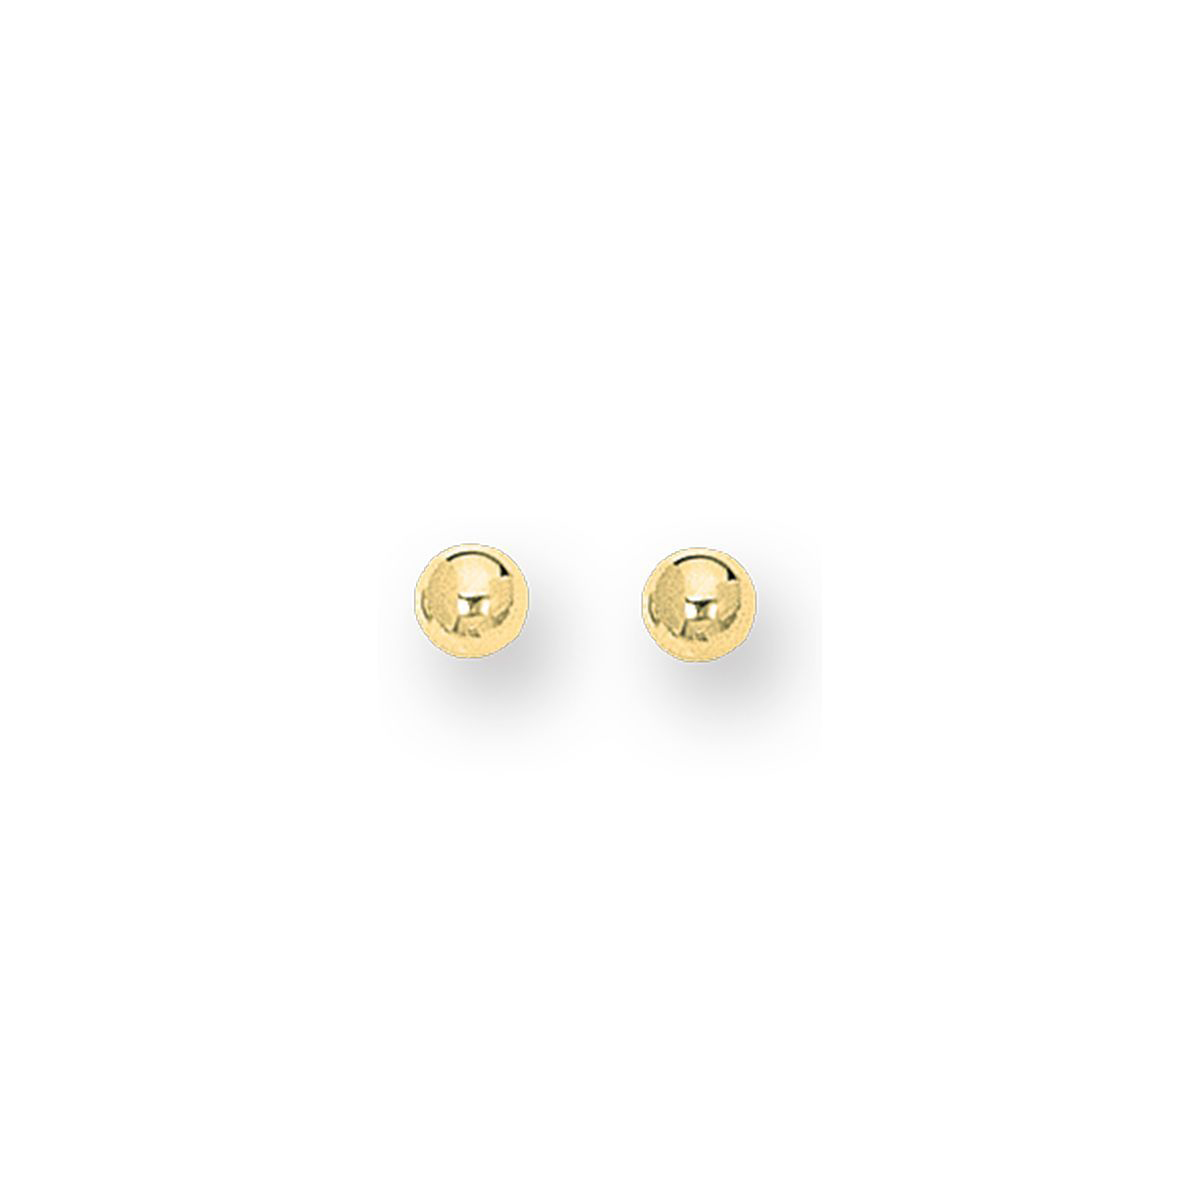 14 Karat yellow gold 5mm Ball Earrings  Post And Friction Backs.